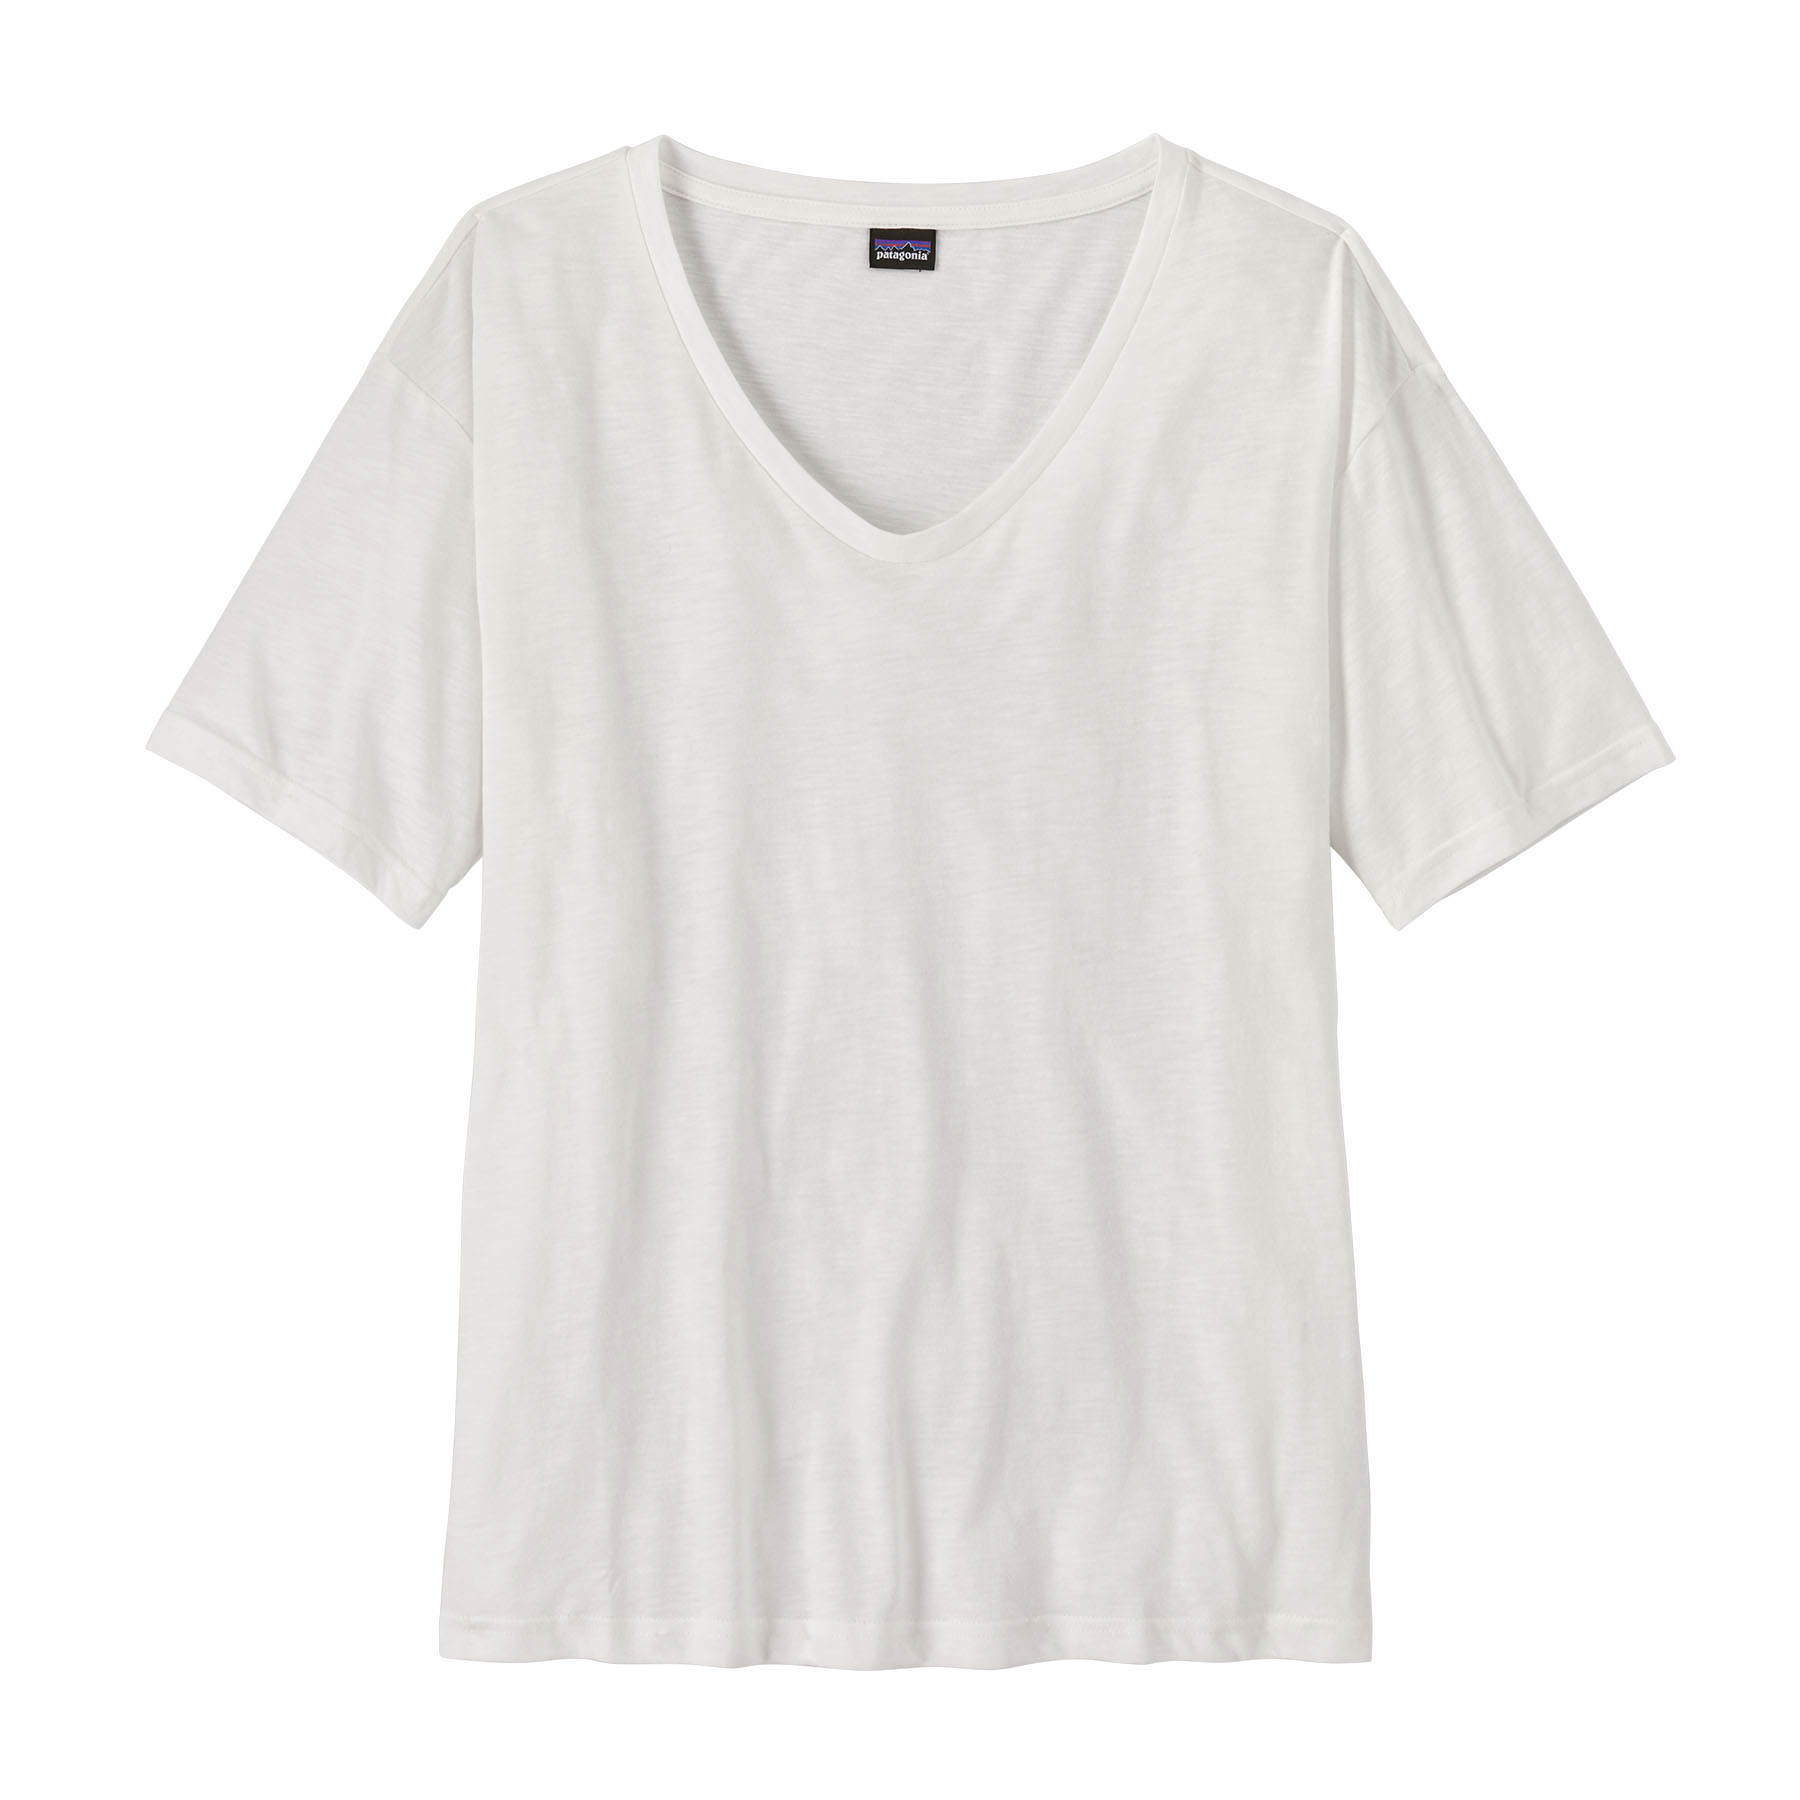 Patagonia Women’s Short Sleeve Mainstay Top White